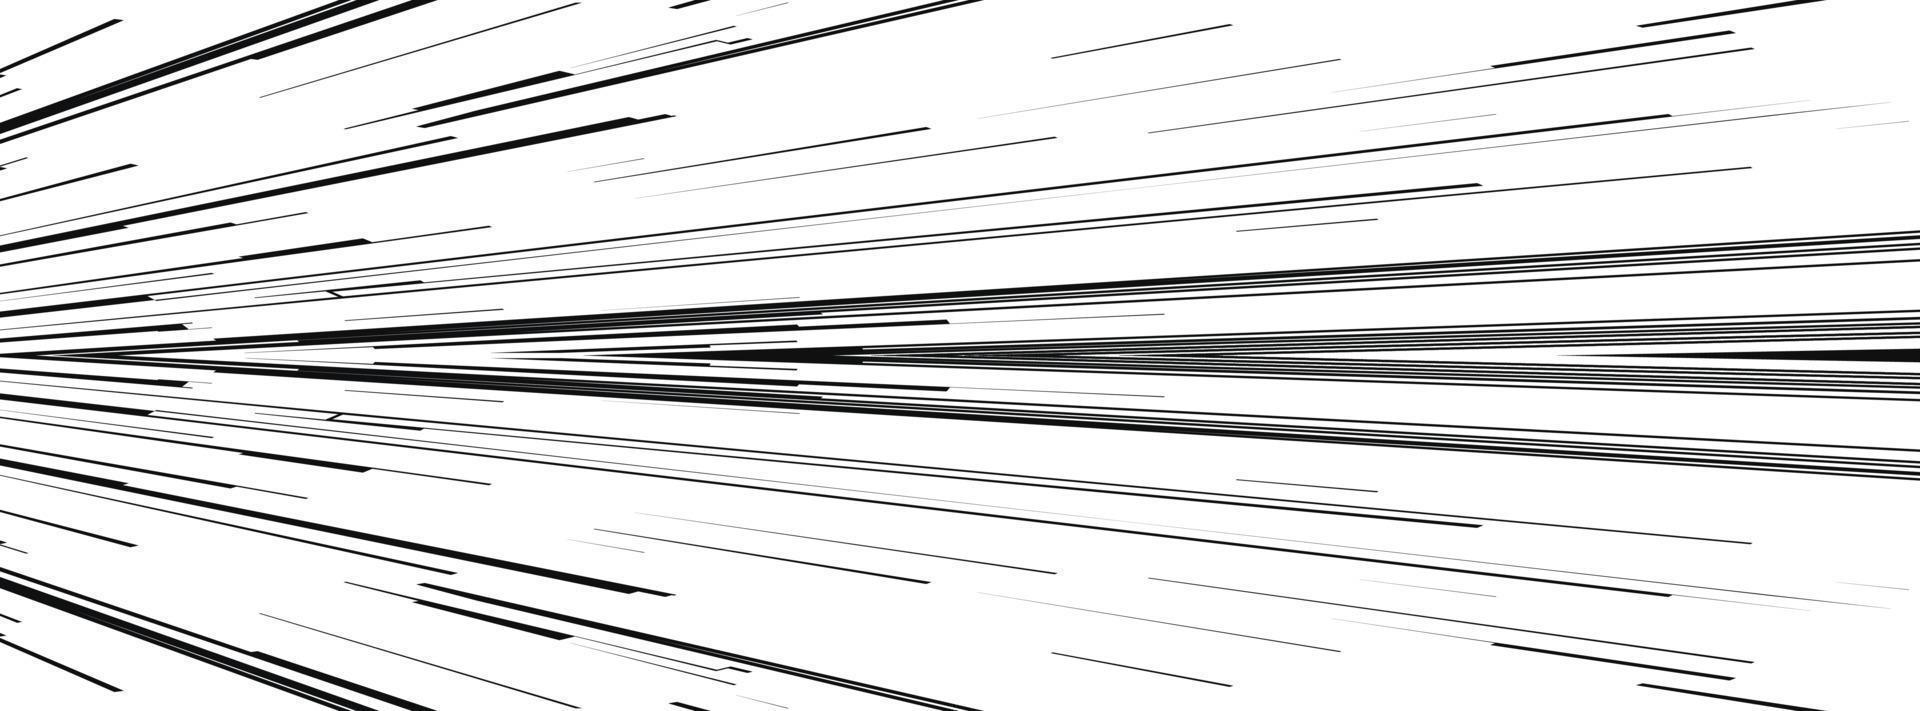 Comic book speed lines isolated on white background vector